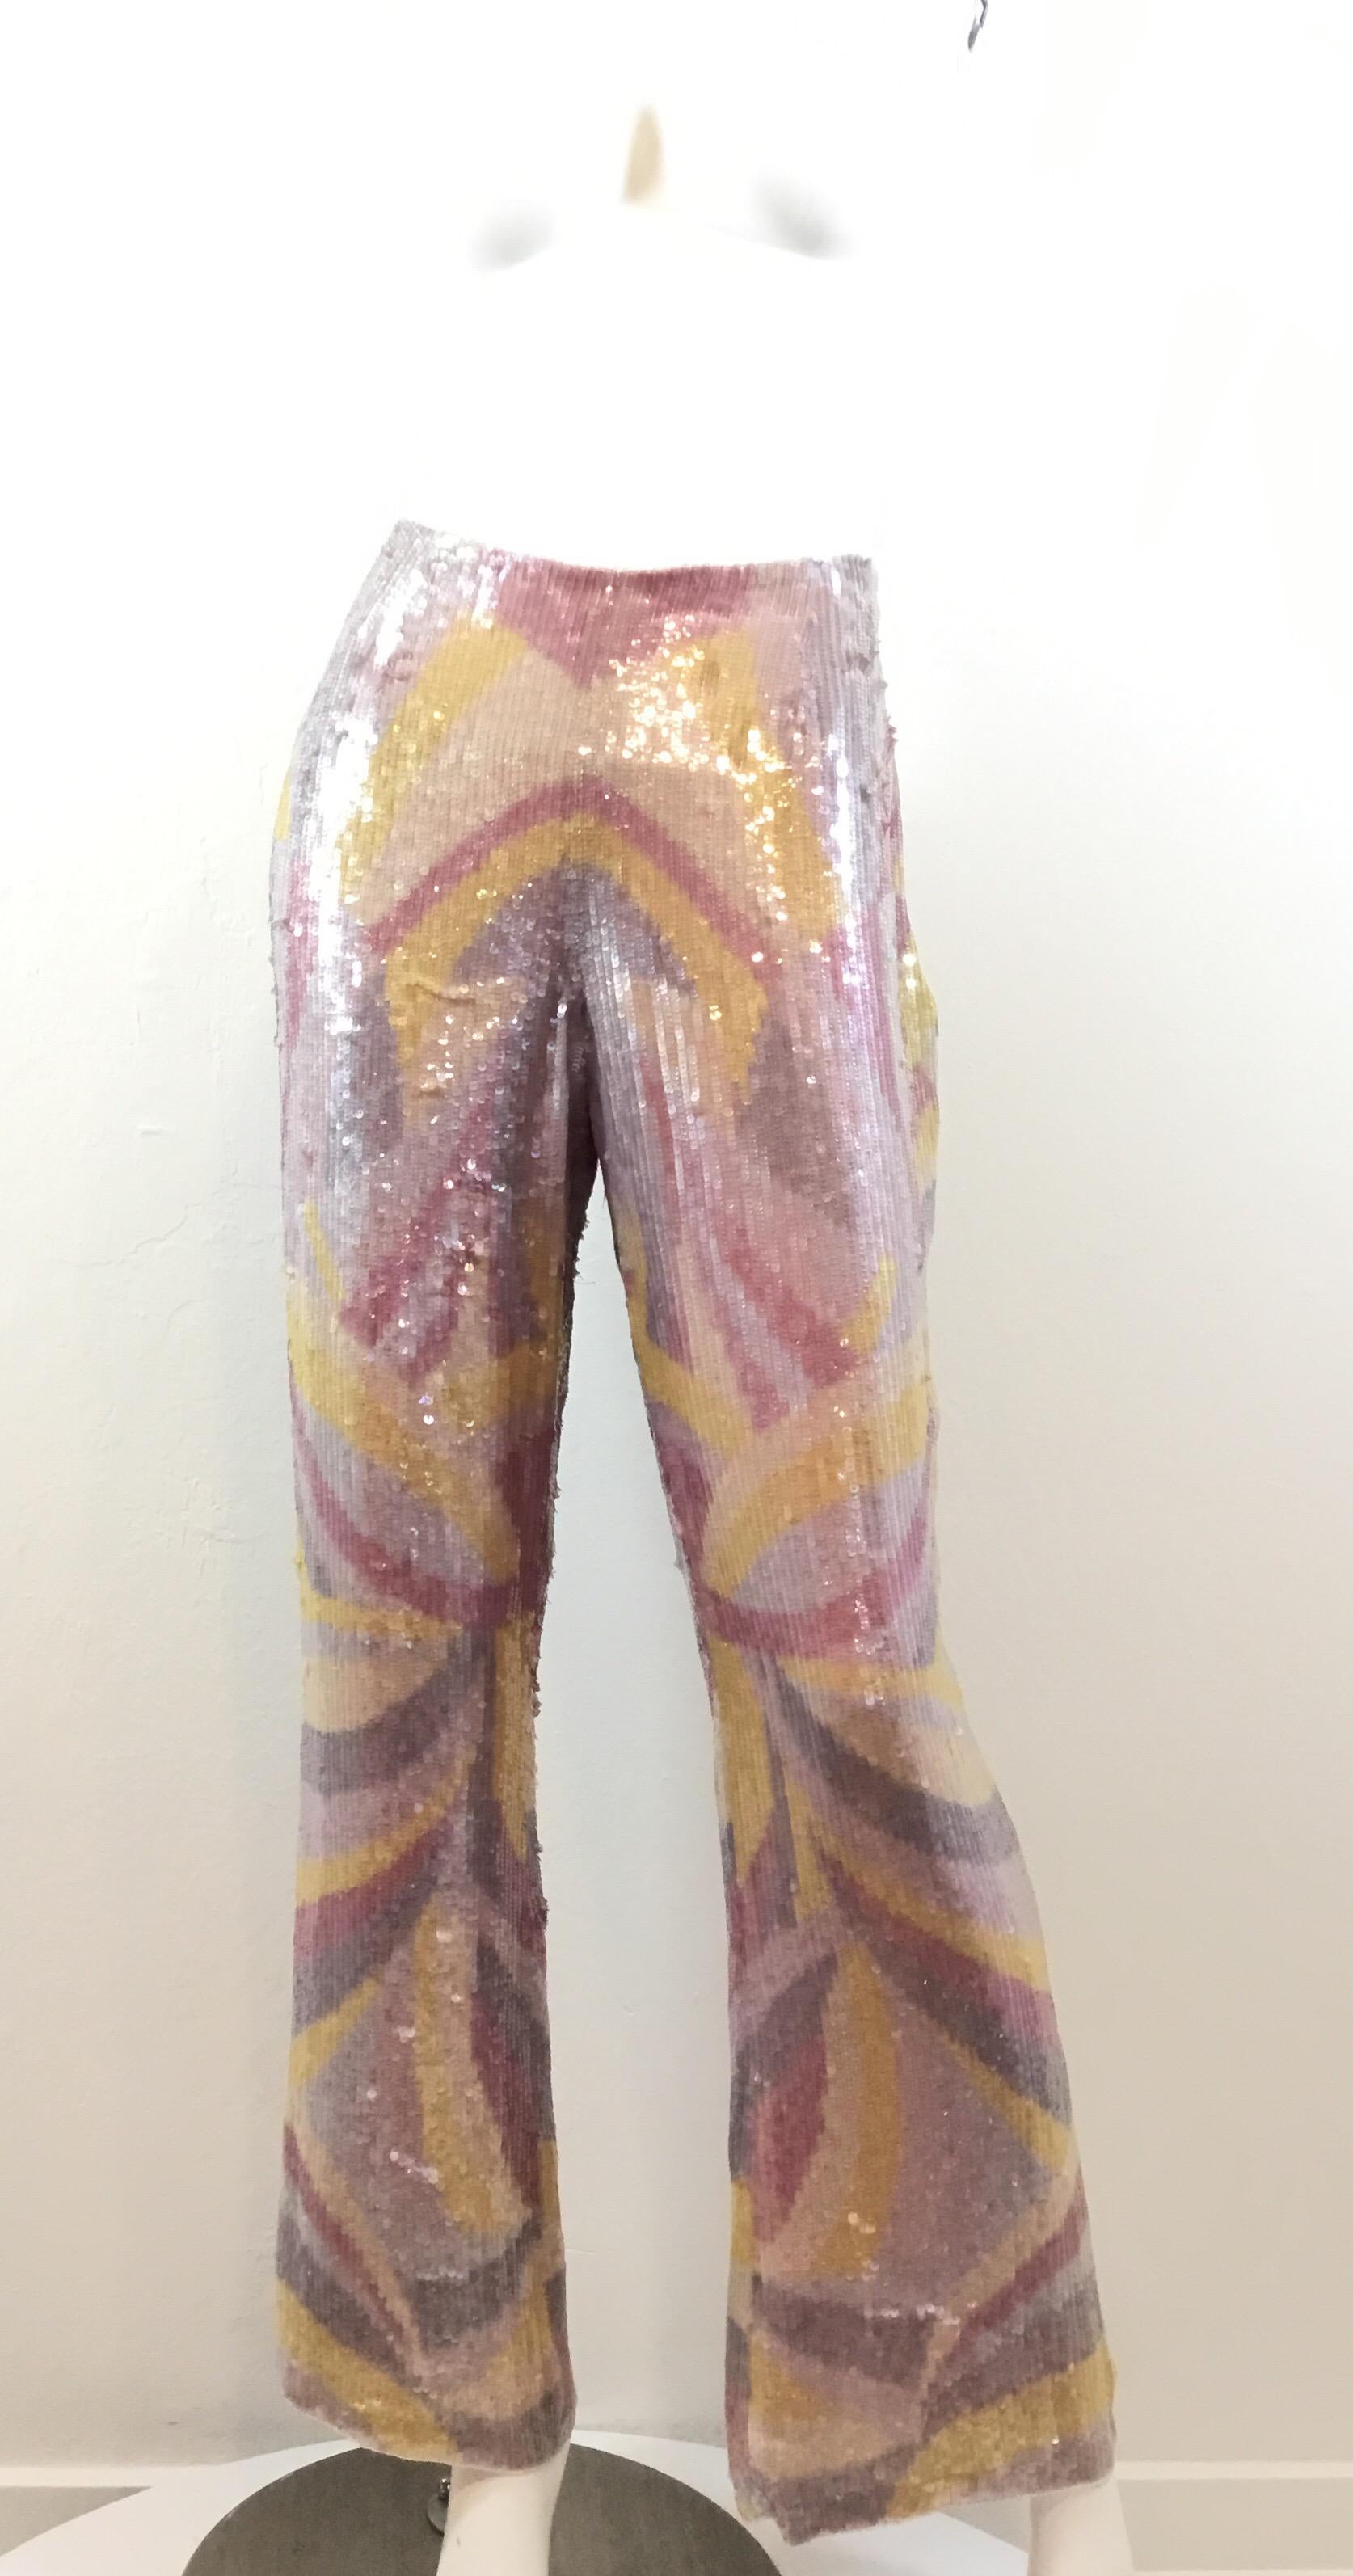 Escada pants featured in soft pastel colors fully covered in sequins with a beaded trim along the waist. Pants are 100% silk and fully lined, size 42.

Waist 32”
Hips 40”
Inseam 30”
Rise 10”
Length 40”

Pants are NEW with tags but do have some minor